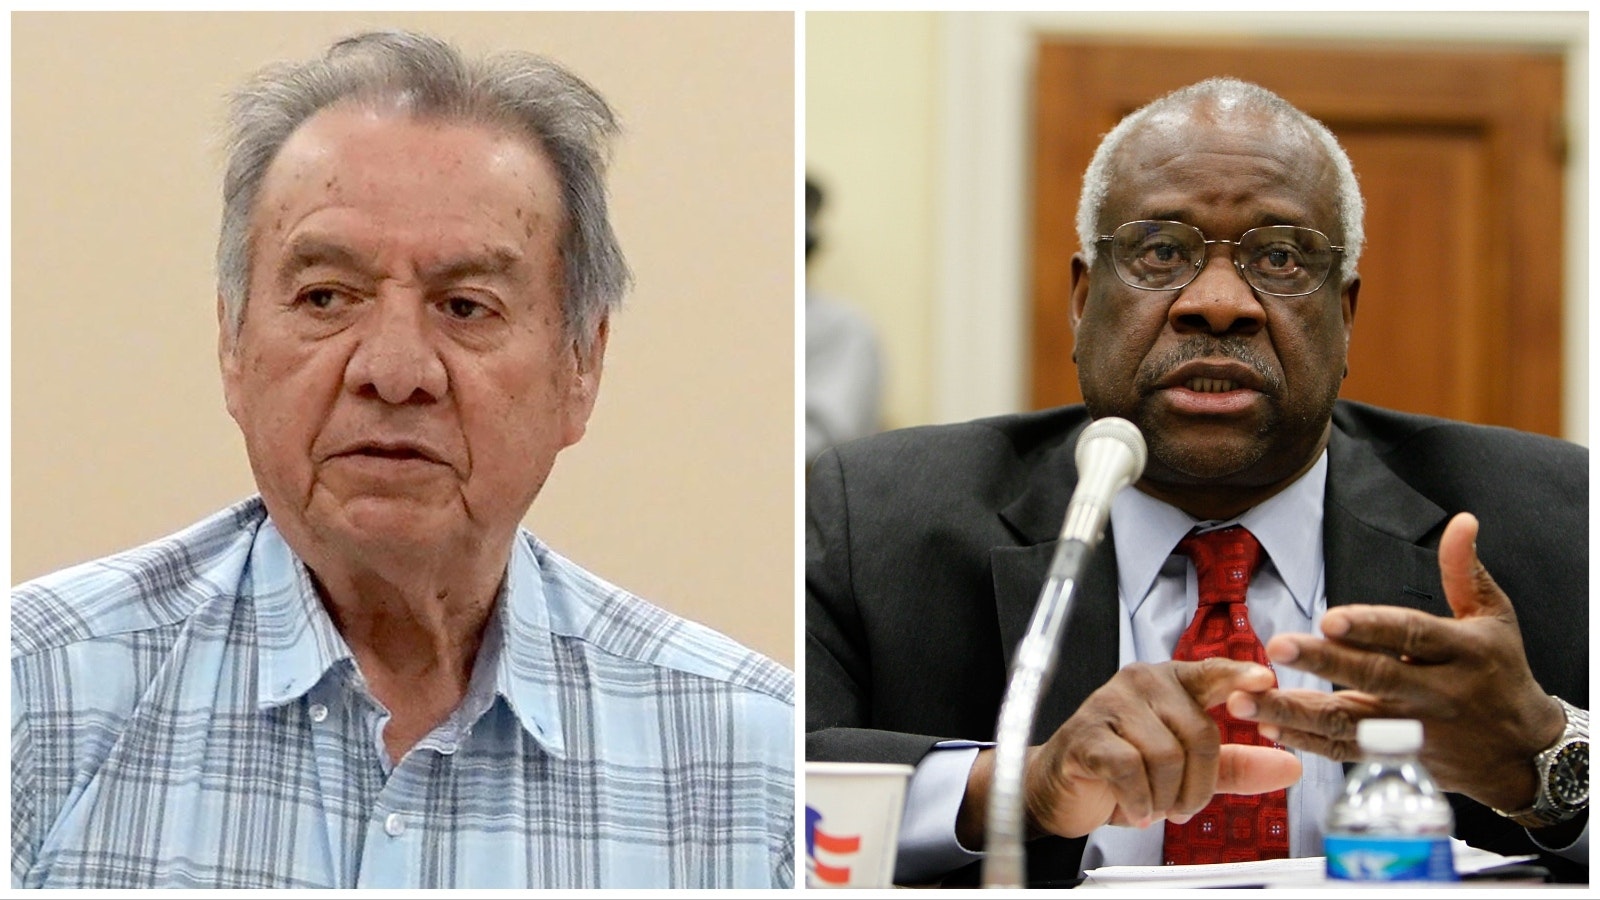 John St. Clair, left, chairman of the Eastern Shoshone Business Council, calls Thursday's U.S. Supreme Court ruling upholding ICWA a victory. Justice Clarence Thomas, right, was one of two dissenters to vote against upholding the Indian Child Welfare Act.